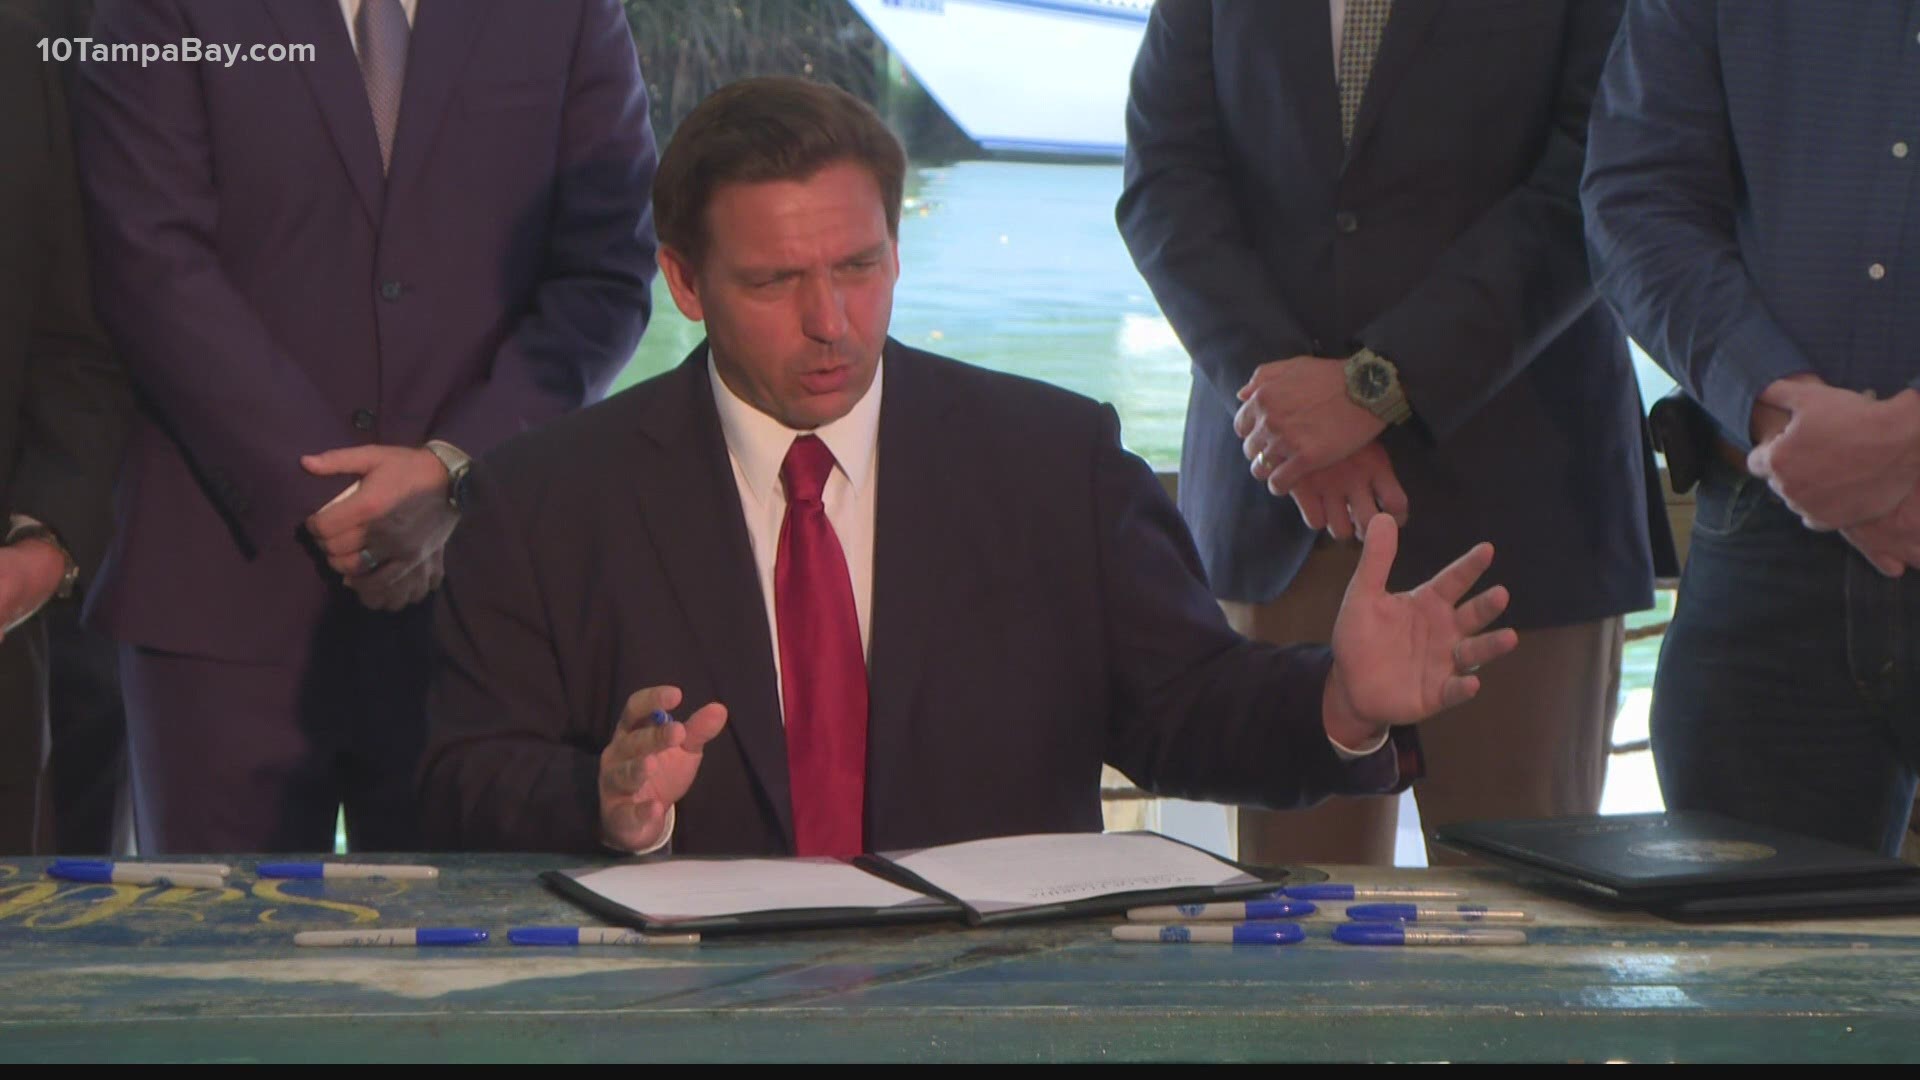 The governor also signed a pandemic-related bill Monday.